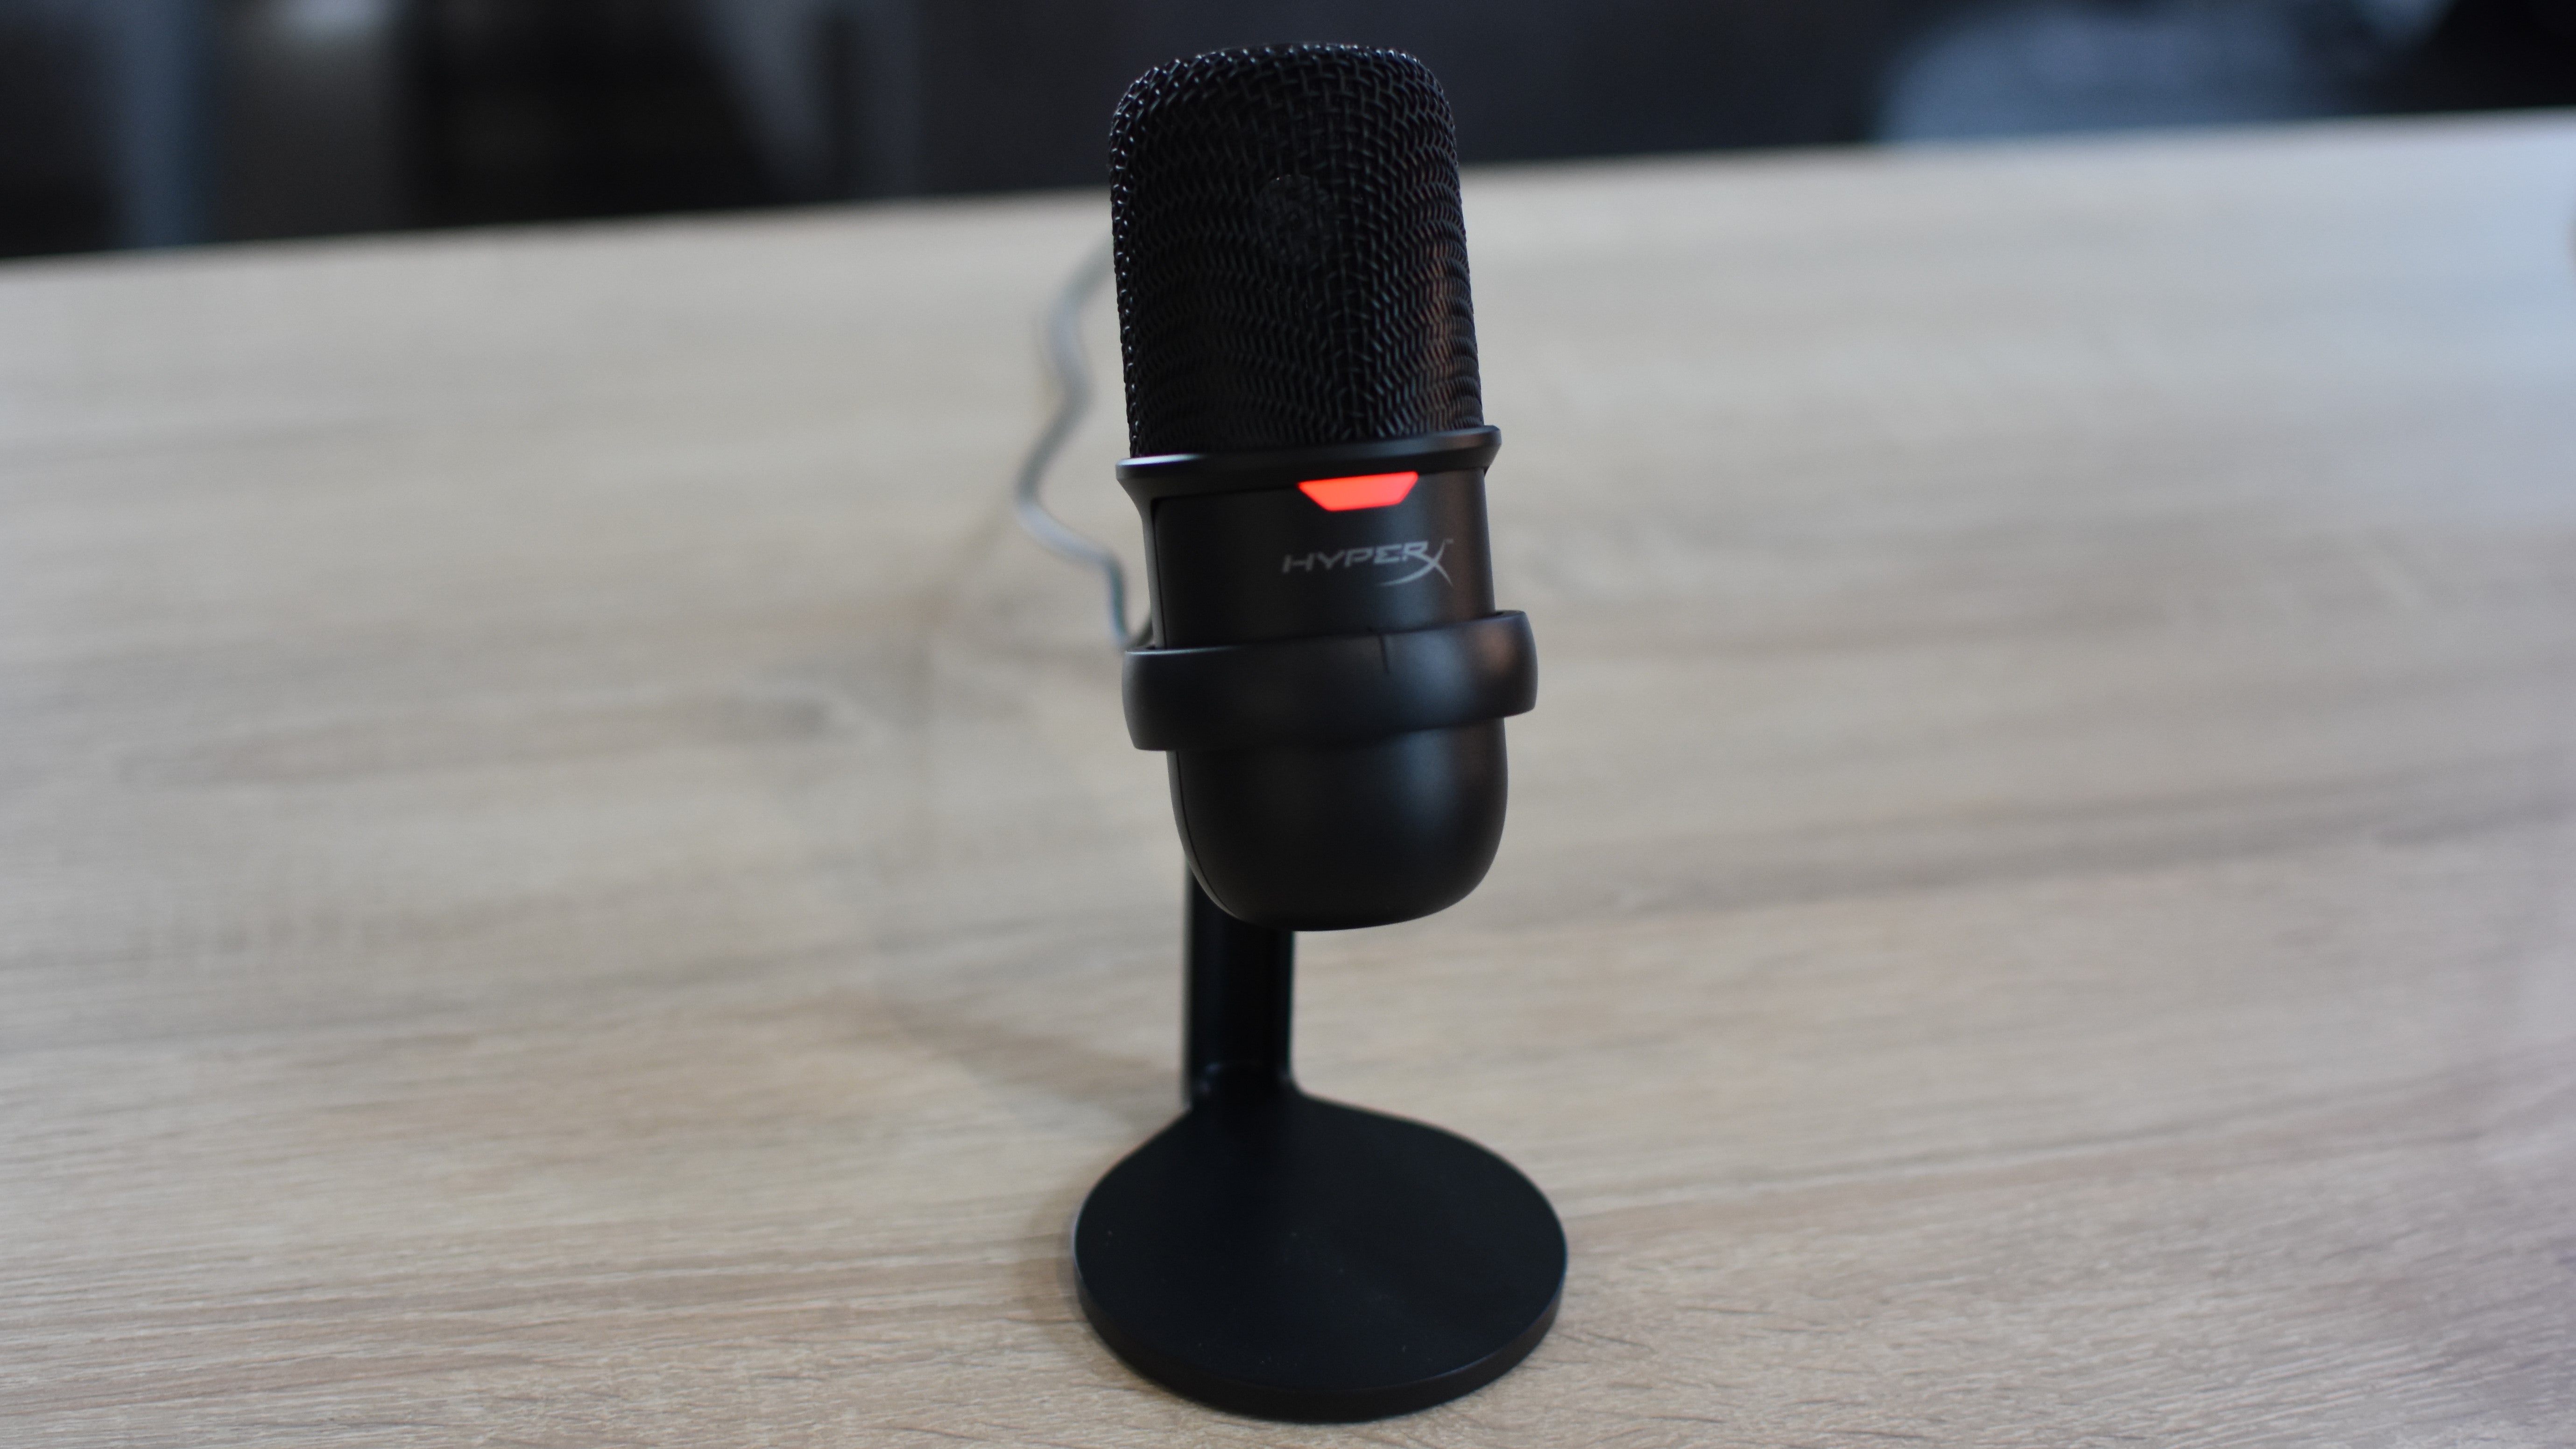 The HyperX SoloCast microphone on a desk.